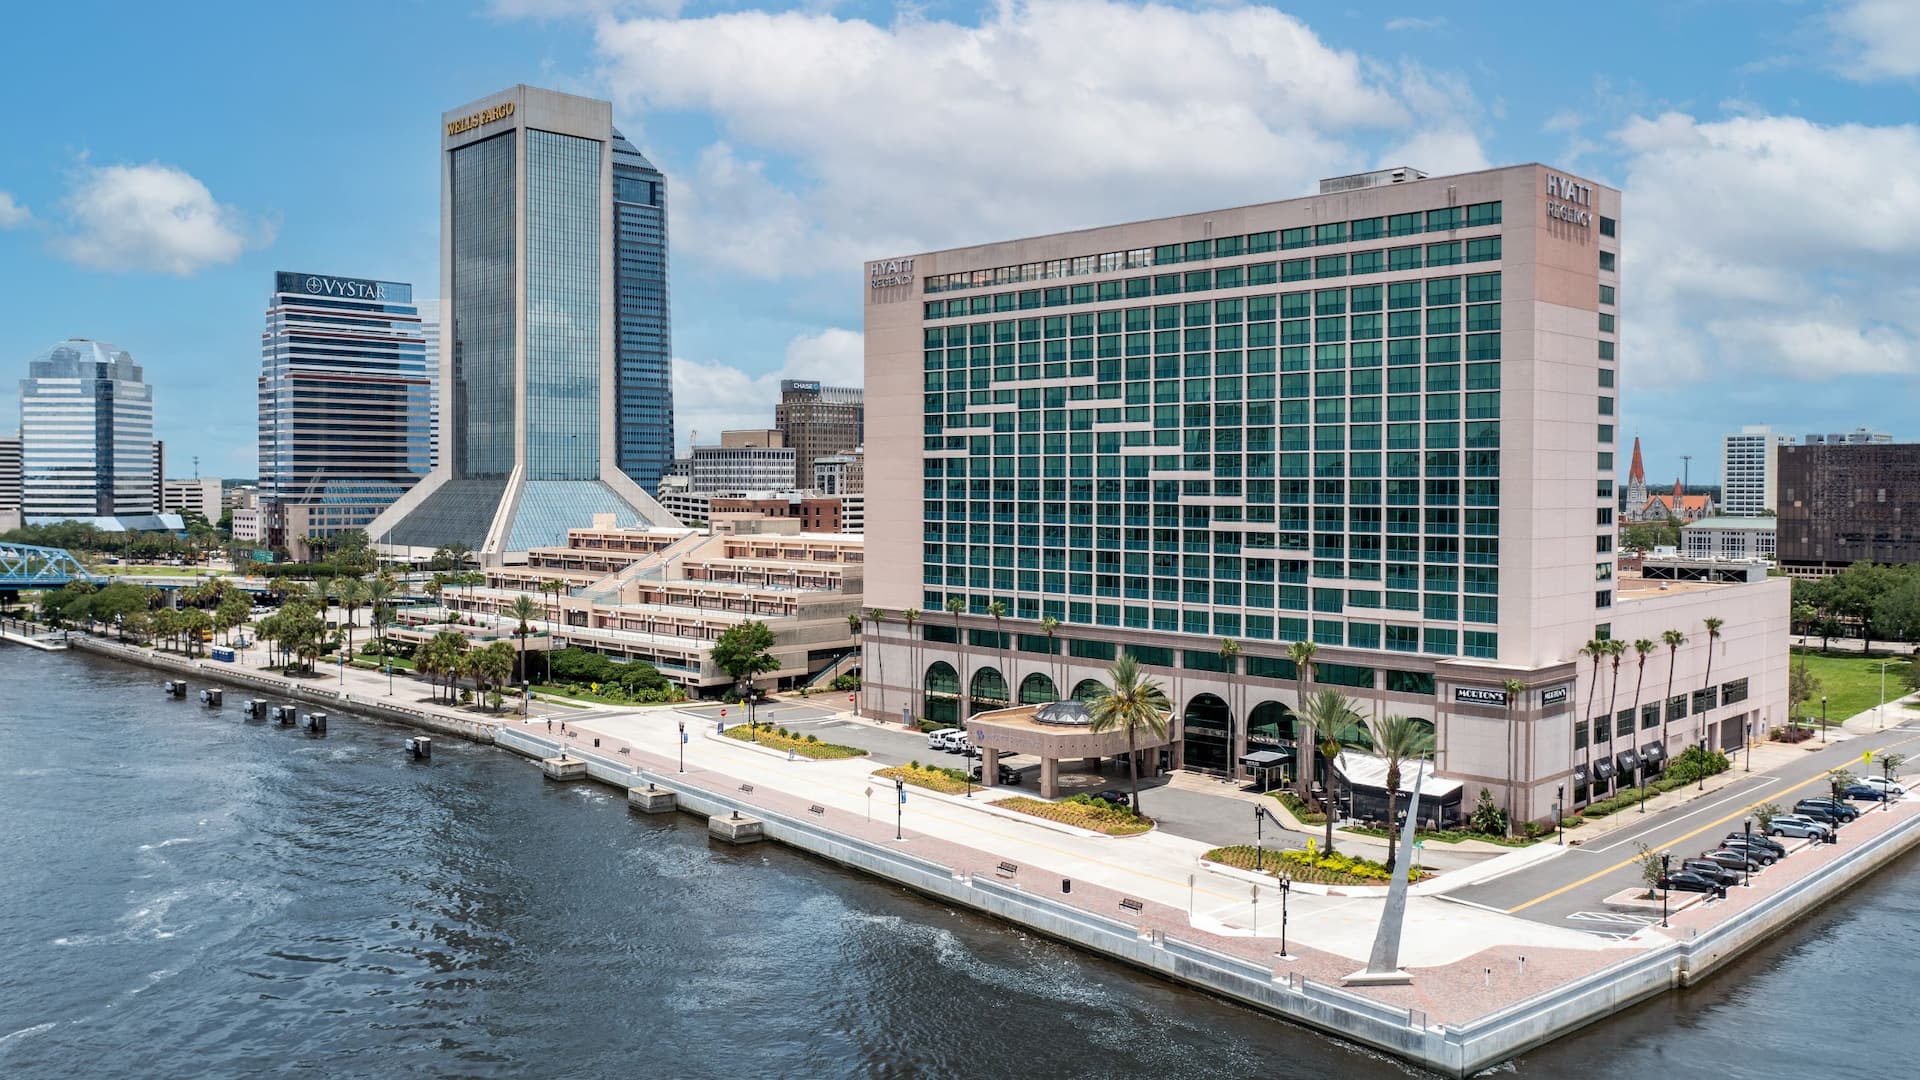 Exterior Daytime Hotel Conference Center Side Angle at Downtown Jacksonville, FL near hotels